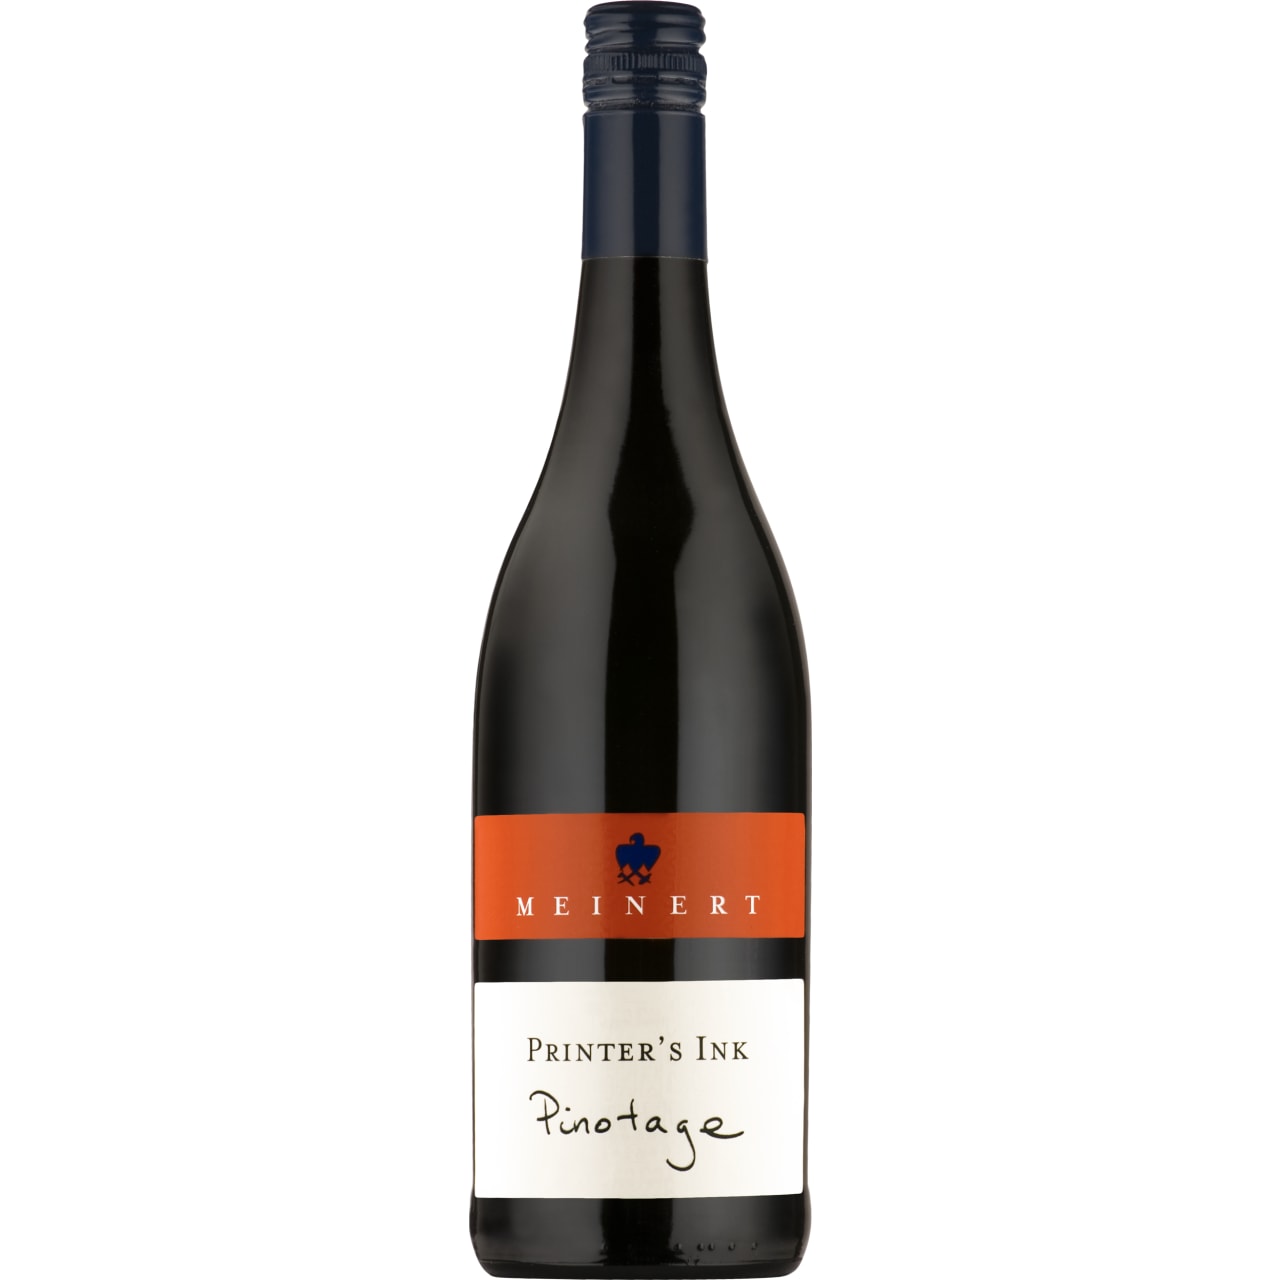 Pinotage is Pinot Noir crossed with Cinsault, and this wine tastes exactly like that - A succulent wine with beautiful balance and no hard edges.